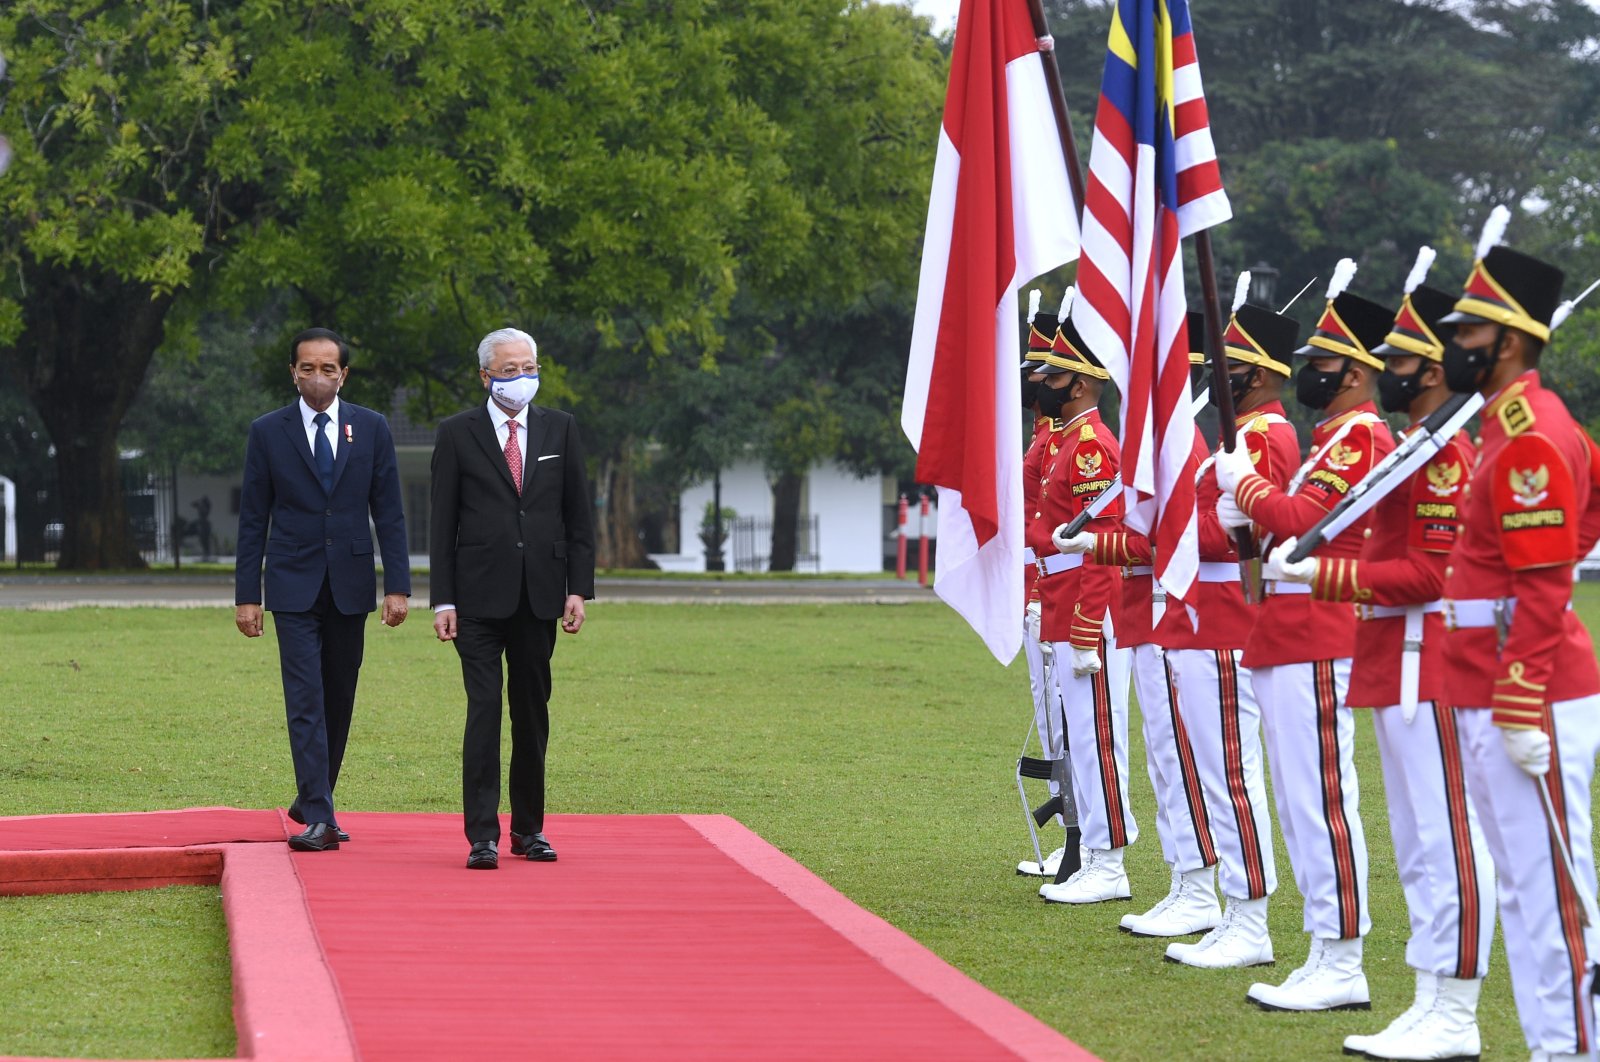 Malaysian Prime Minister Ismail Sabri Yaakob, (C), and Indonesian President Joko Widodo, (L), inspect honor guards during their meeting in Bogor, West Java, Indonesia, Nov. 10, 2021. (AP Photo)